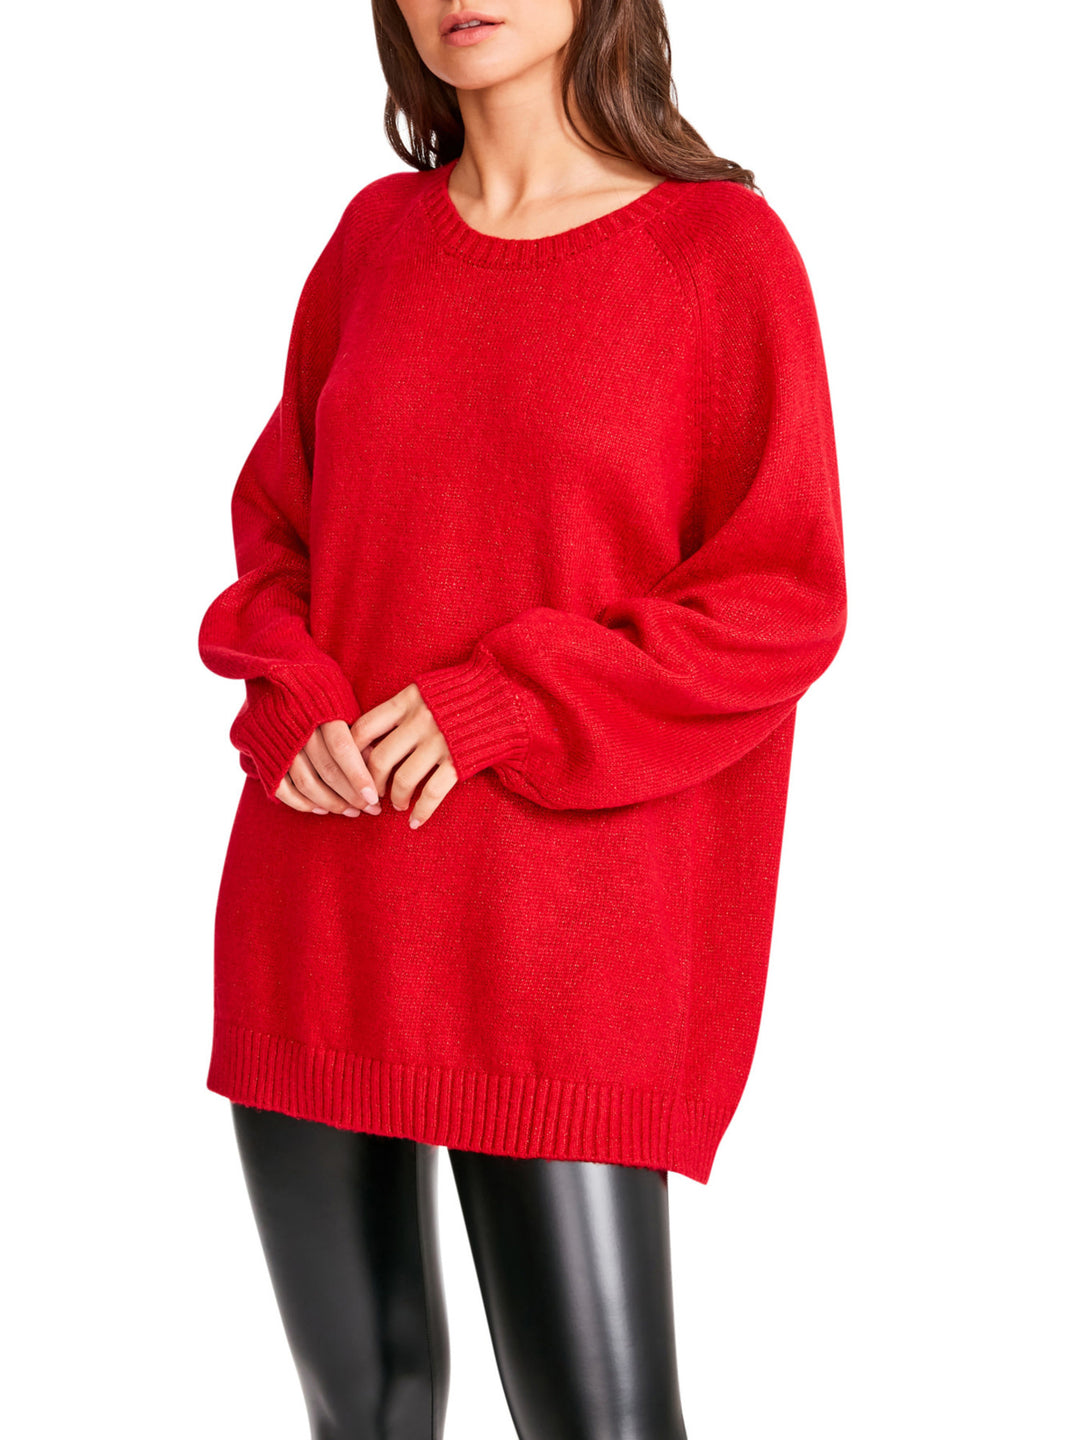 KNITS REAL SWEATER - Kingfisher Road - Online Boutique